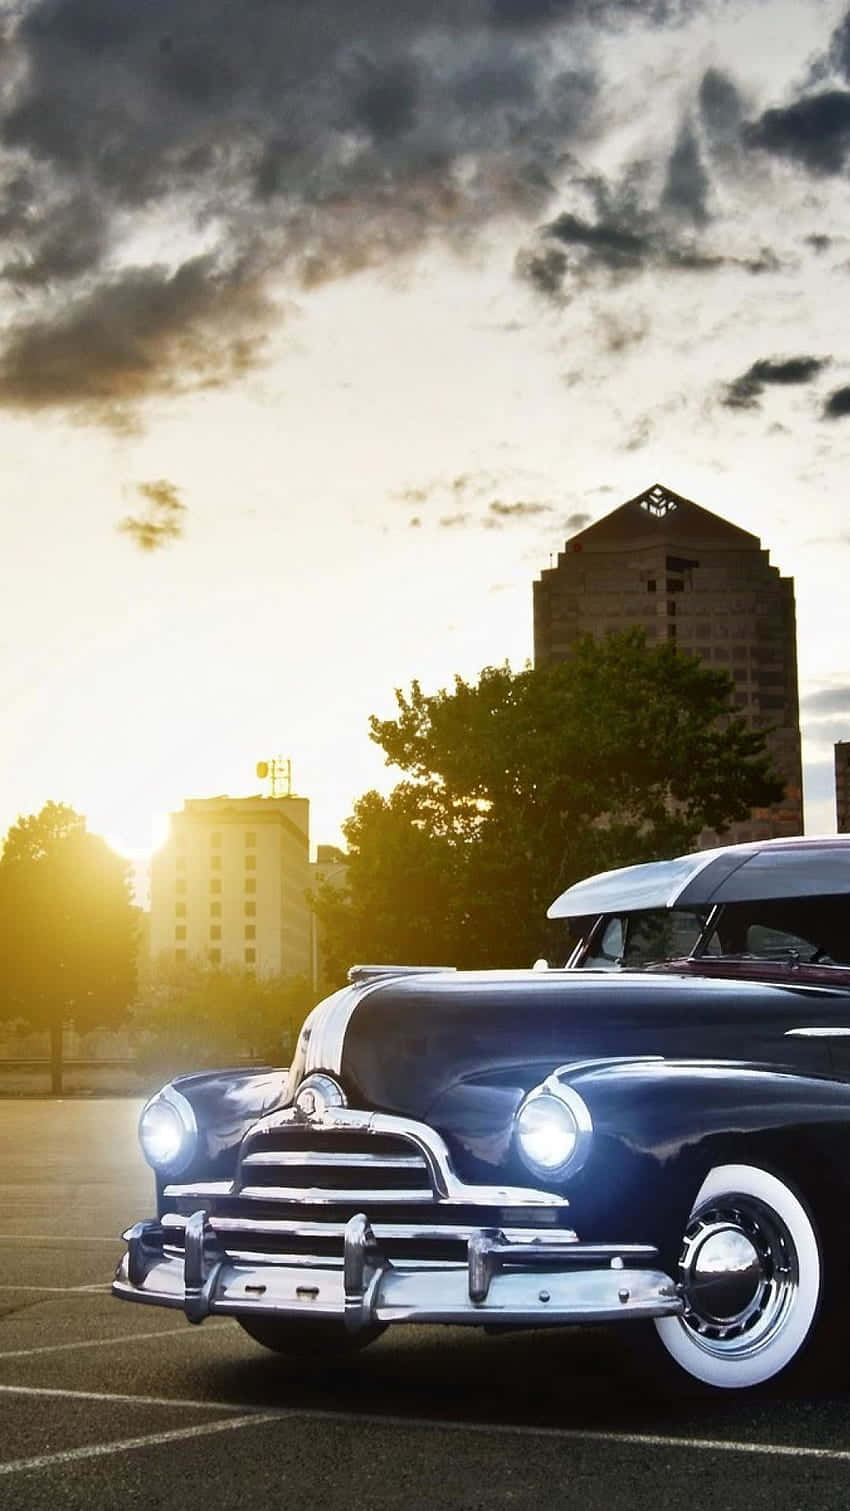 Vintage Car With Sun Shining Iphone Wallpaper